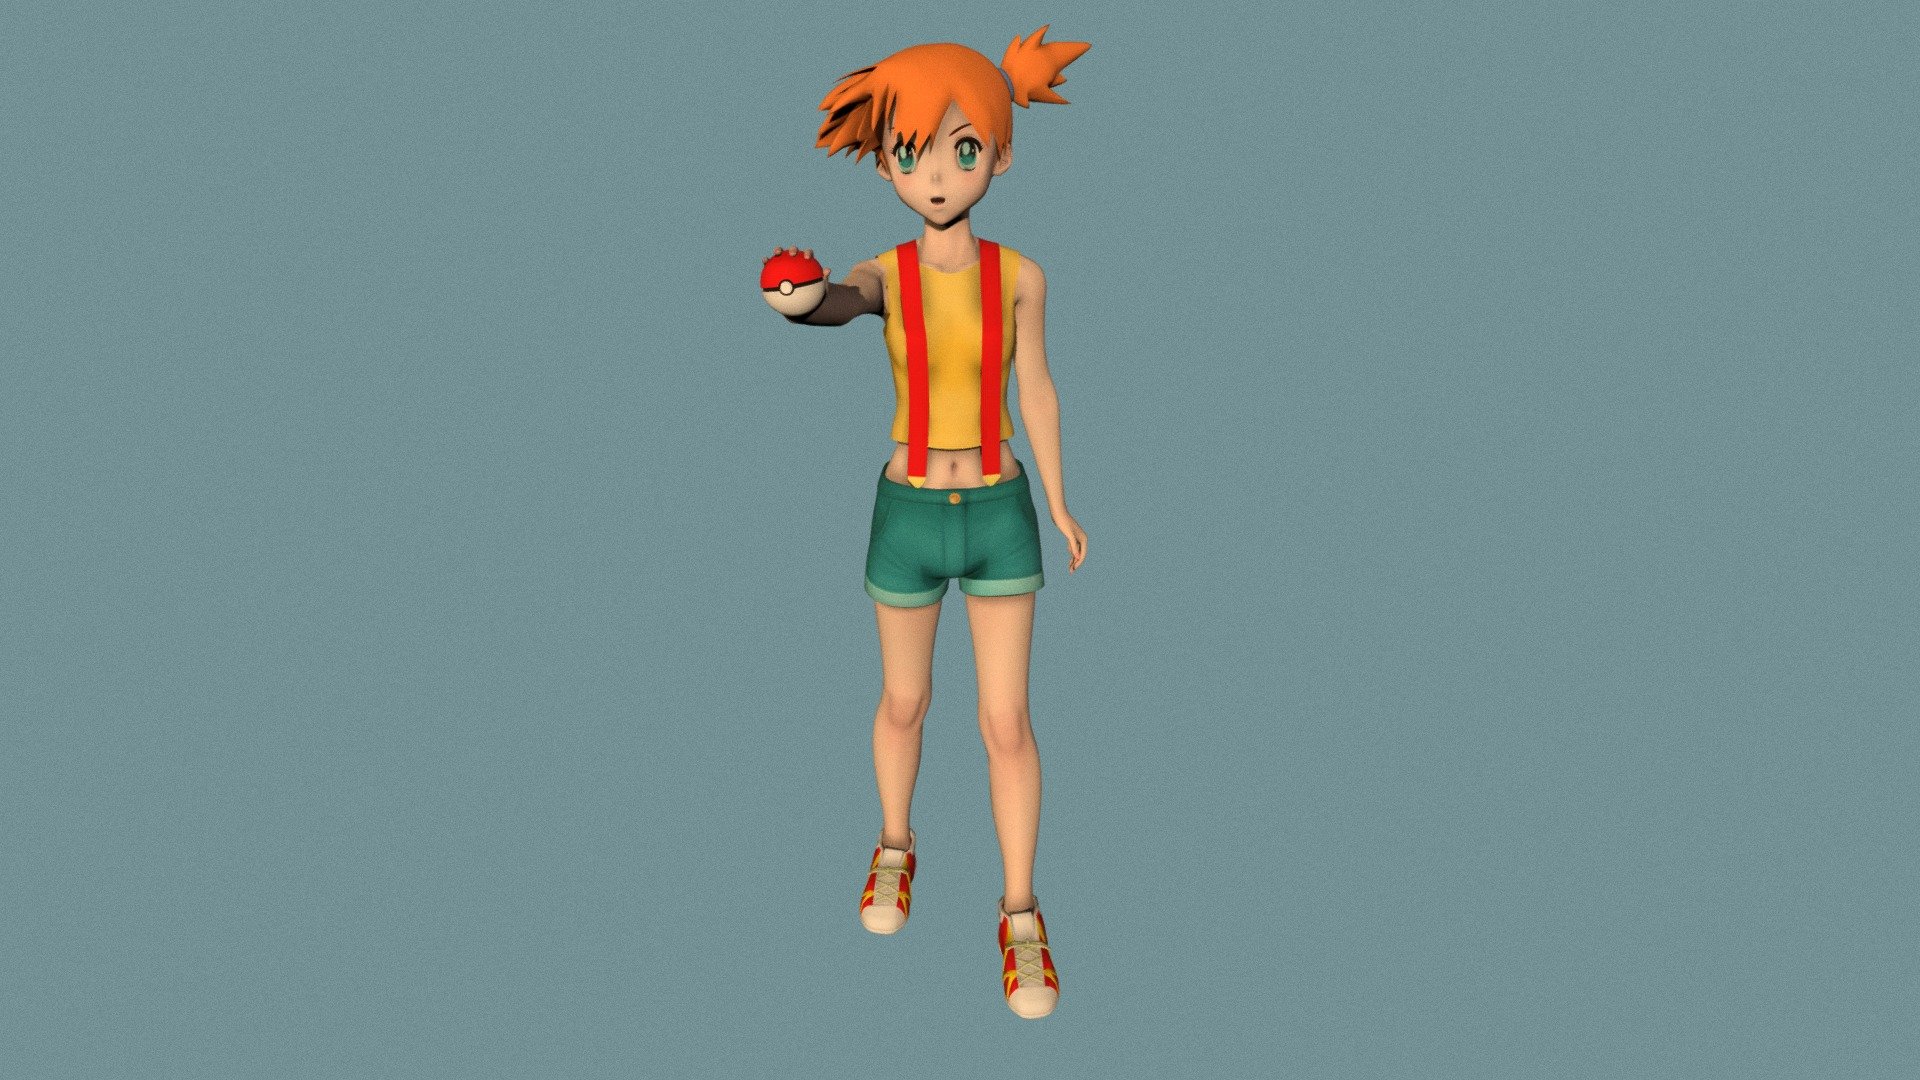 Posed model of anime girl Misty (Pokemon).

This product include .FBX (ver. 7200) and .MAX (ver. 2010) files.

Rigged version: https://sketchfab.com/3d-models/t-pose-rigged-model-of-misty-32c6f6221e29428a994e43997d860290

I support convert this 3D model to various file formats: 3DS; AI; ASE; DAE; DWF; DWG; DXF; FLT; HTR; IGS; M3G; MQO; OBJ; SAT; STL; W3D; WRL; X.

You can buy all of my models in one pack to save cost: https://sketchfab.com/3d-models/all-of-my-anime-girls-c5a56156994e4193b9e8fa21a3b8360b

And I can make commission models.

If you have any questions, please leave a comment or contact me via my email 3d.eden.project@gmail.com 3d model